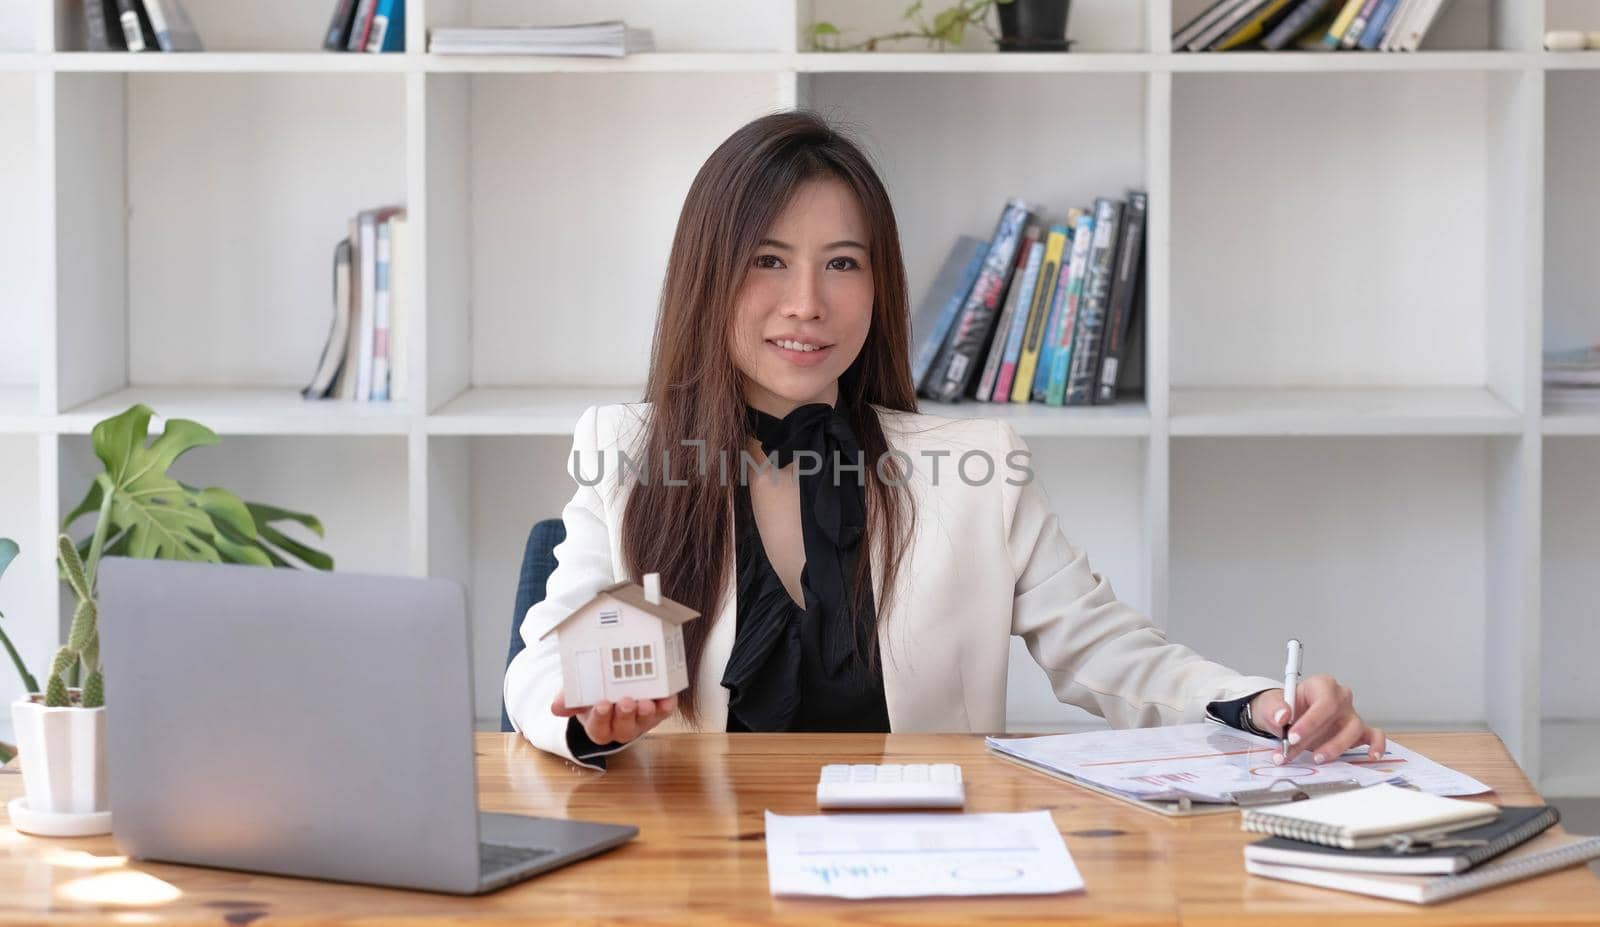 Miniature house in the hands of an Asian woman real estate agent home loan working at the office. Looking at the camera..